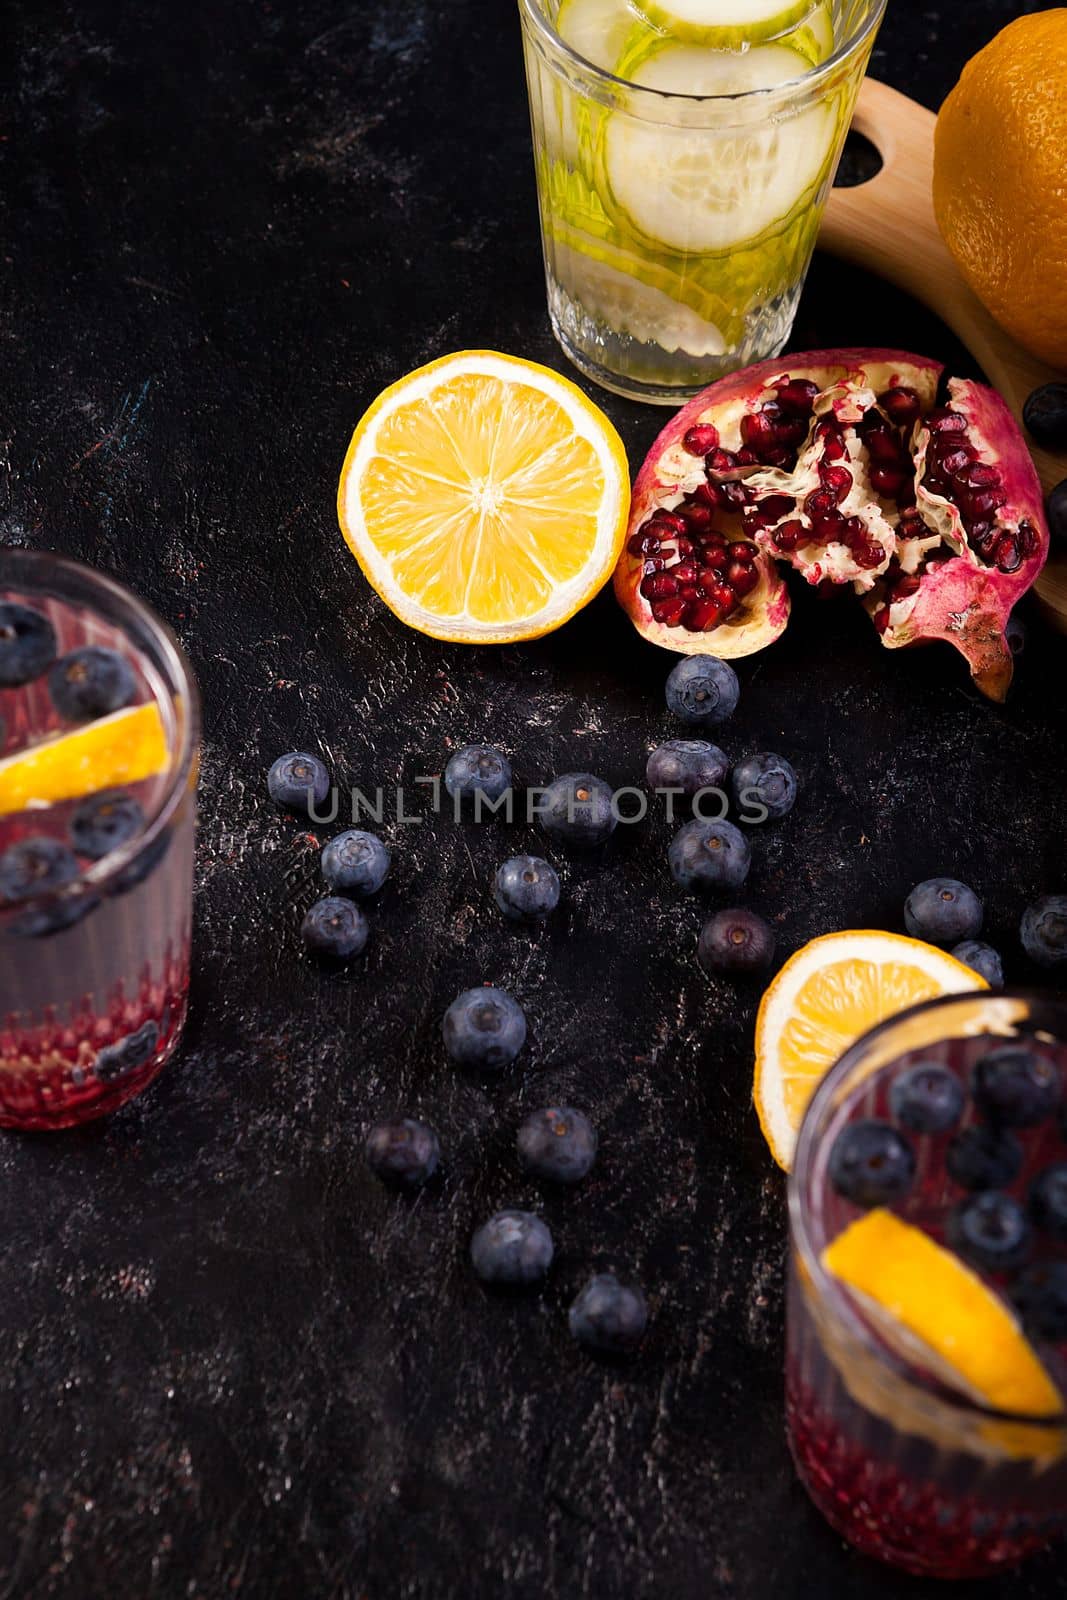 Lemons, pomegranate and berries on dark wooden background by DCStudio